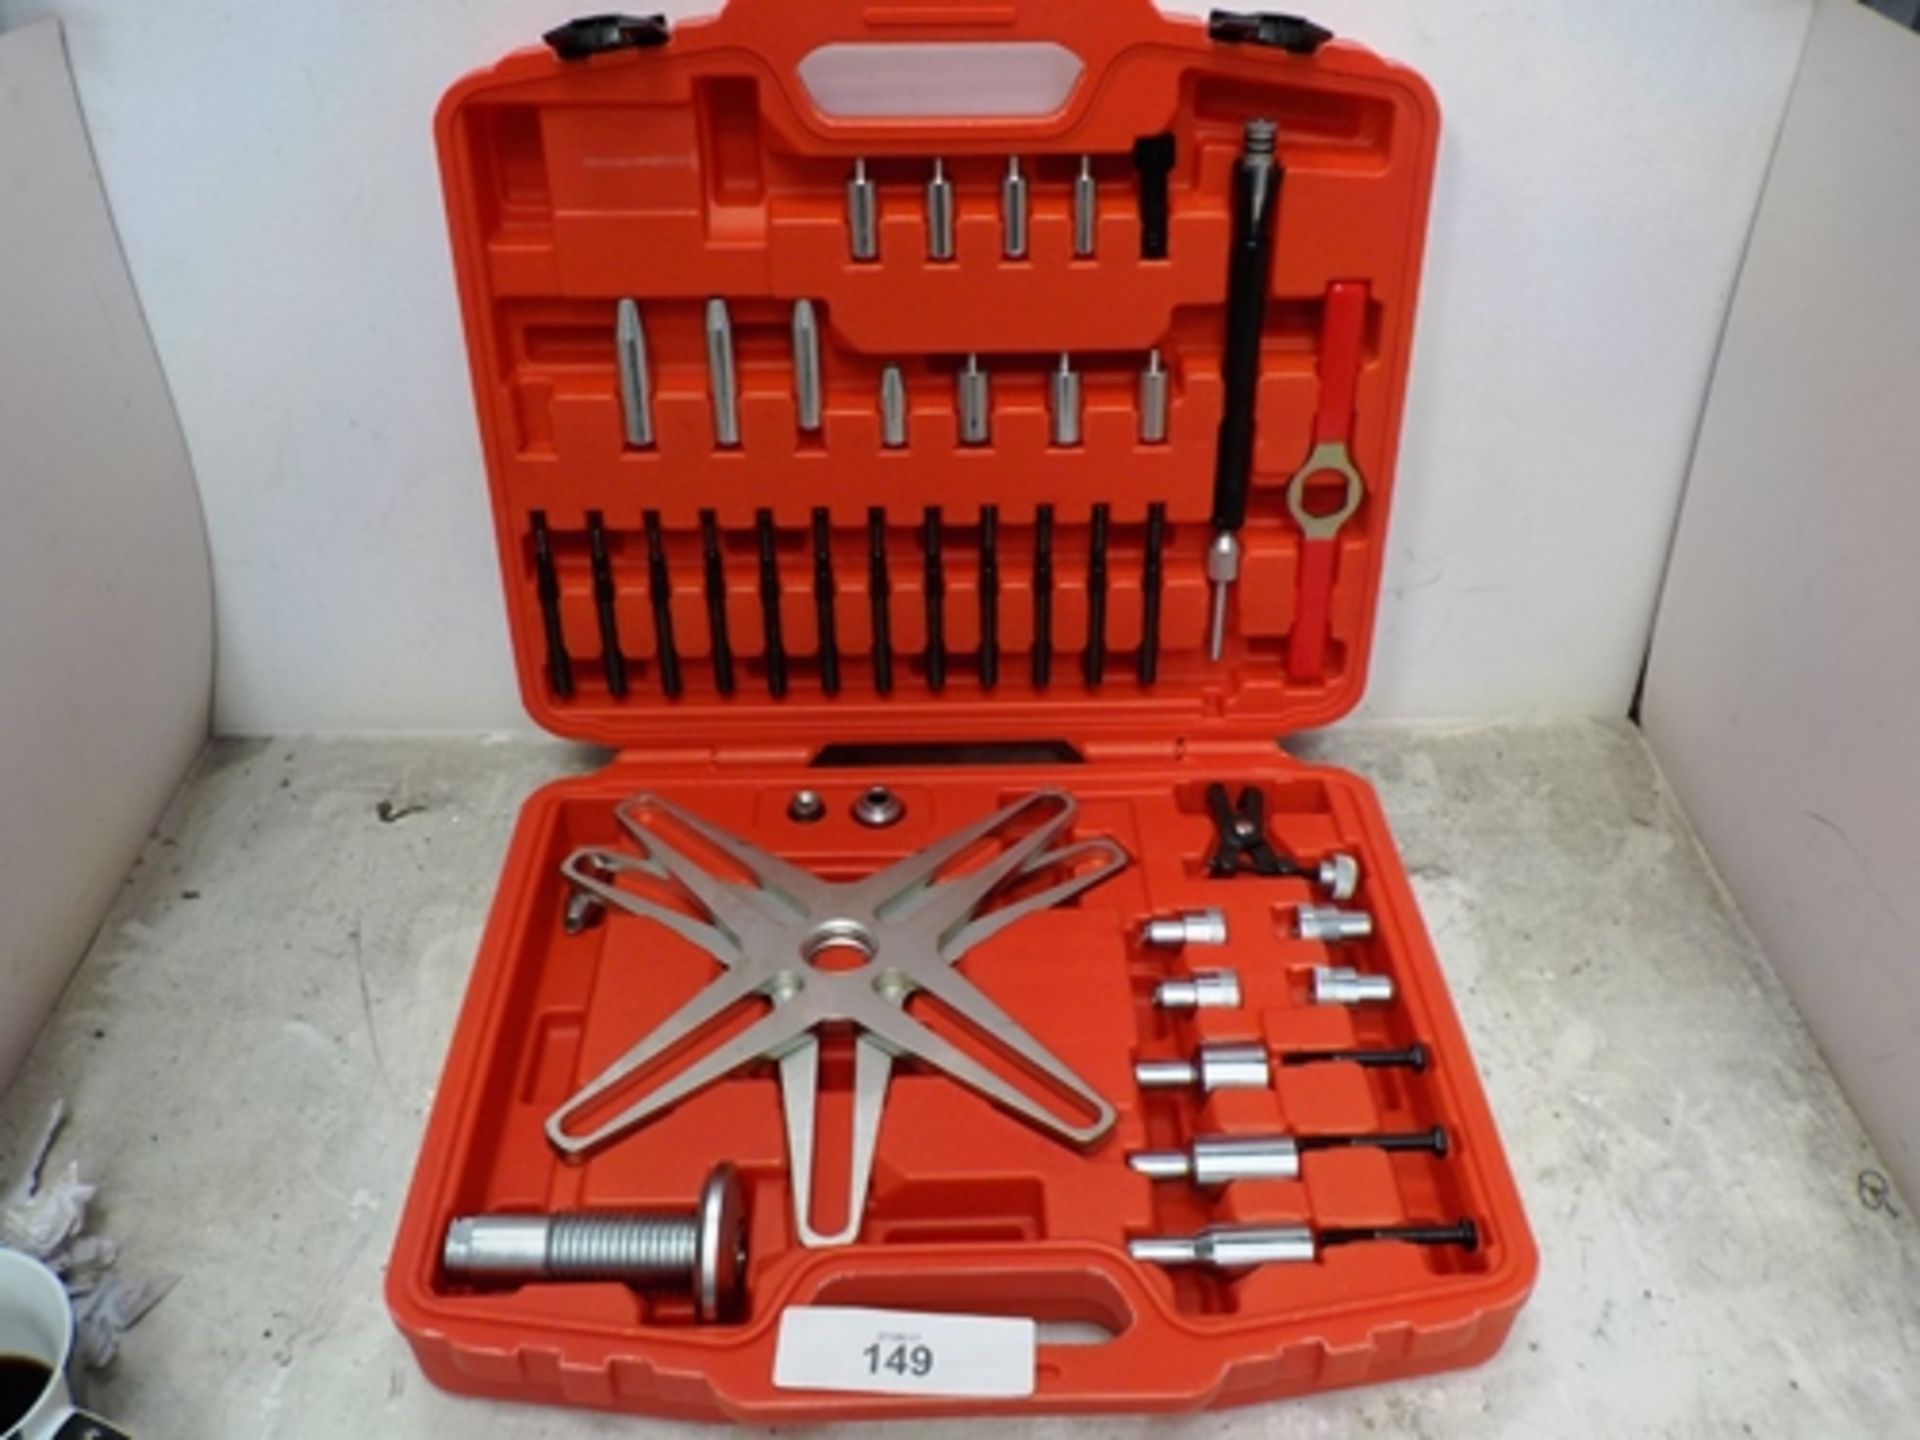 Self-adjusting clutch tool set in heavy duty carry case - New (TC6)